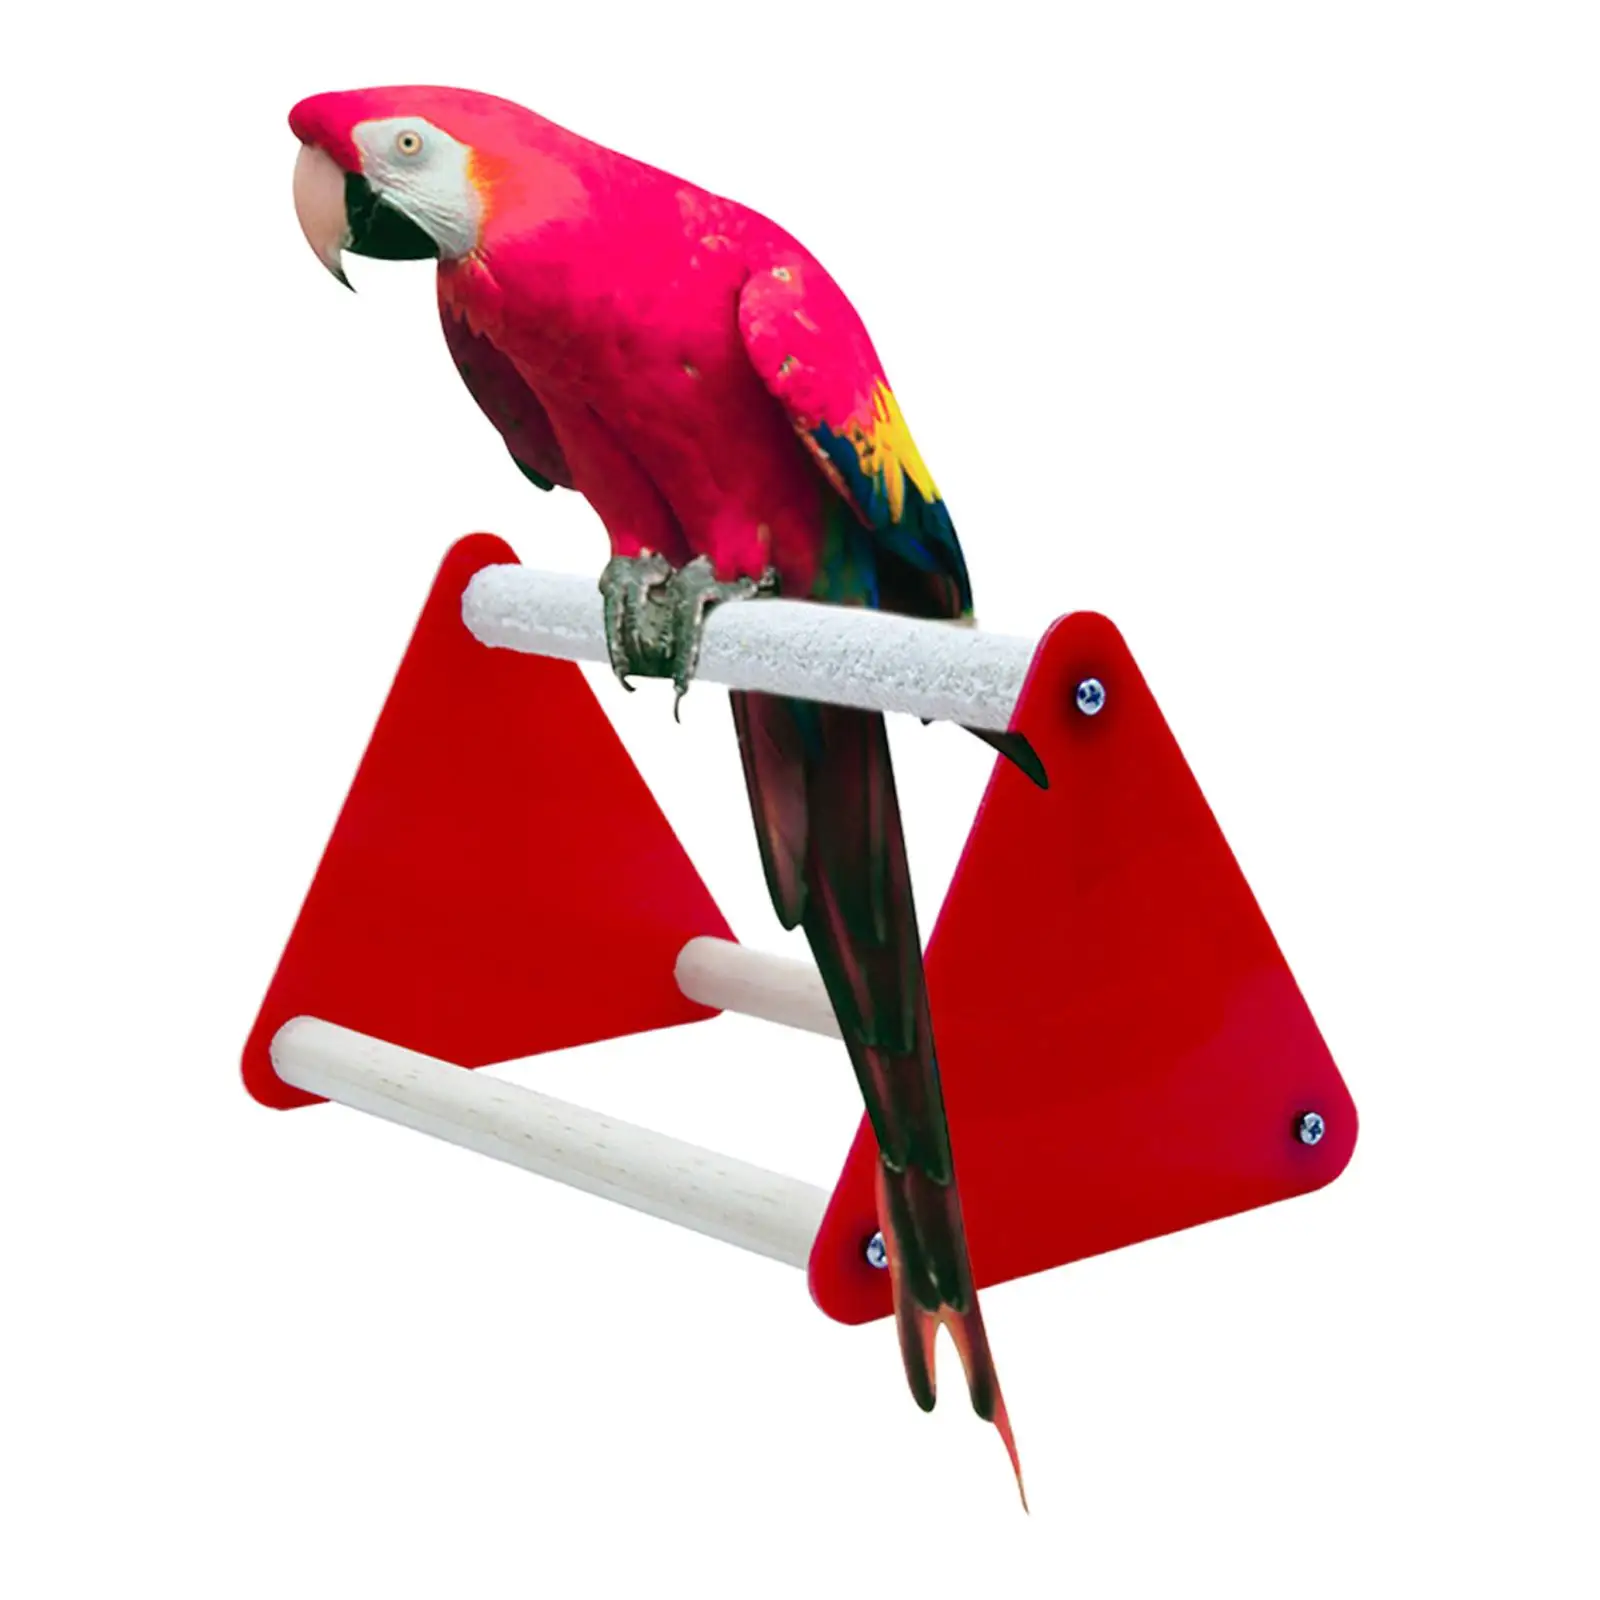 Parrot Playstand Portable Bird Play Stand Platform Toys for Budgie Cockatiel